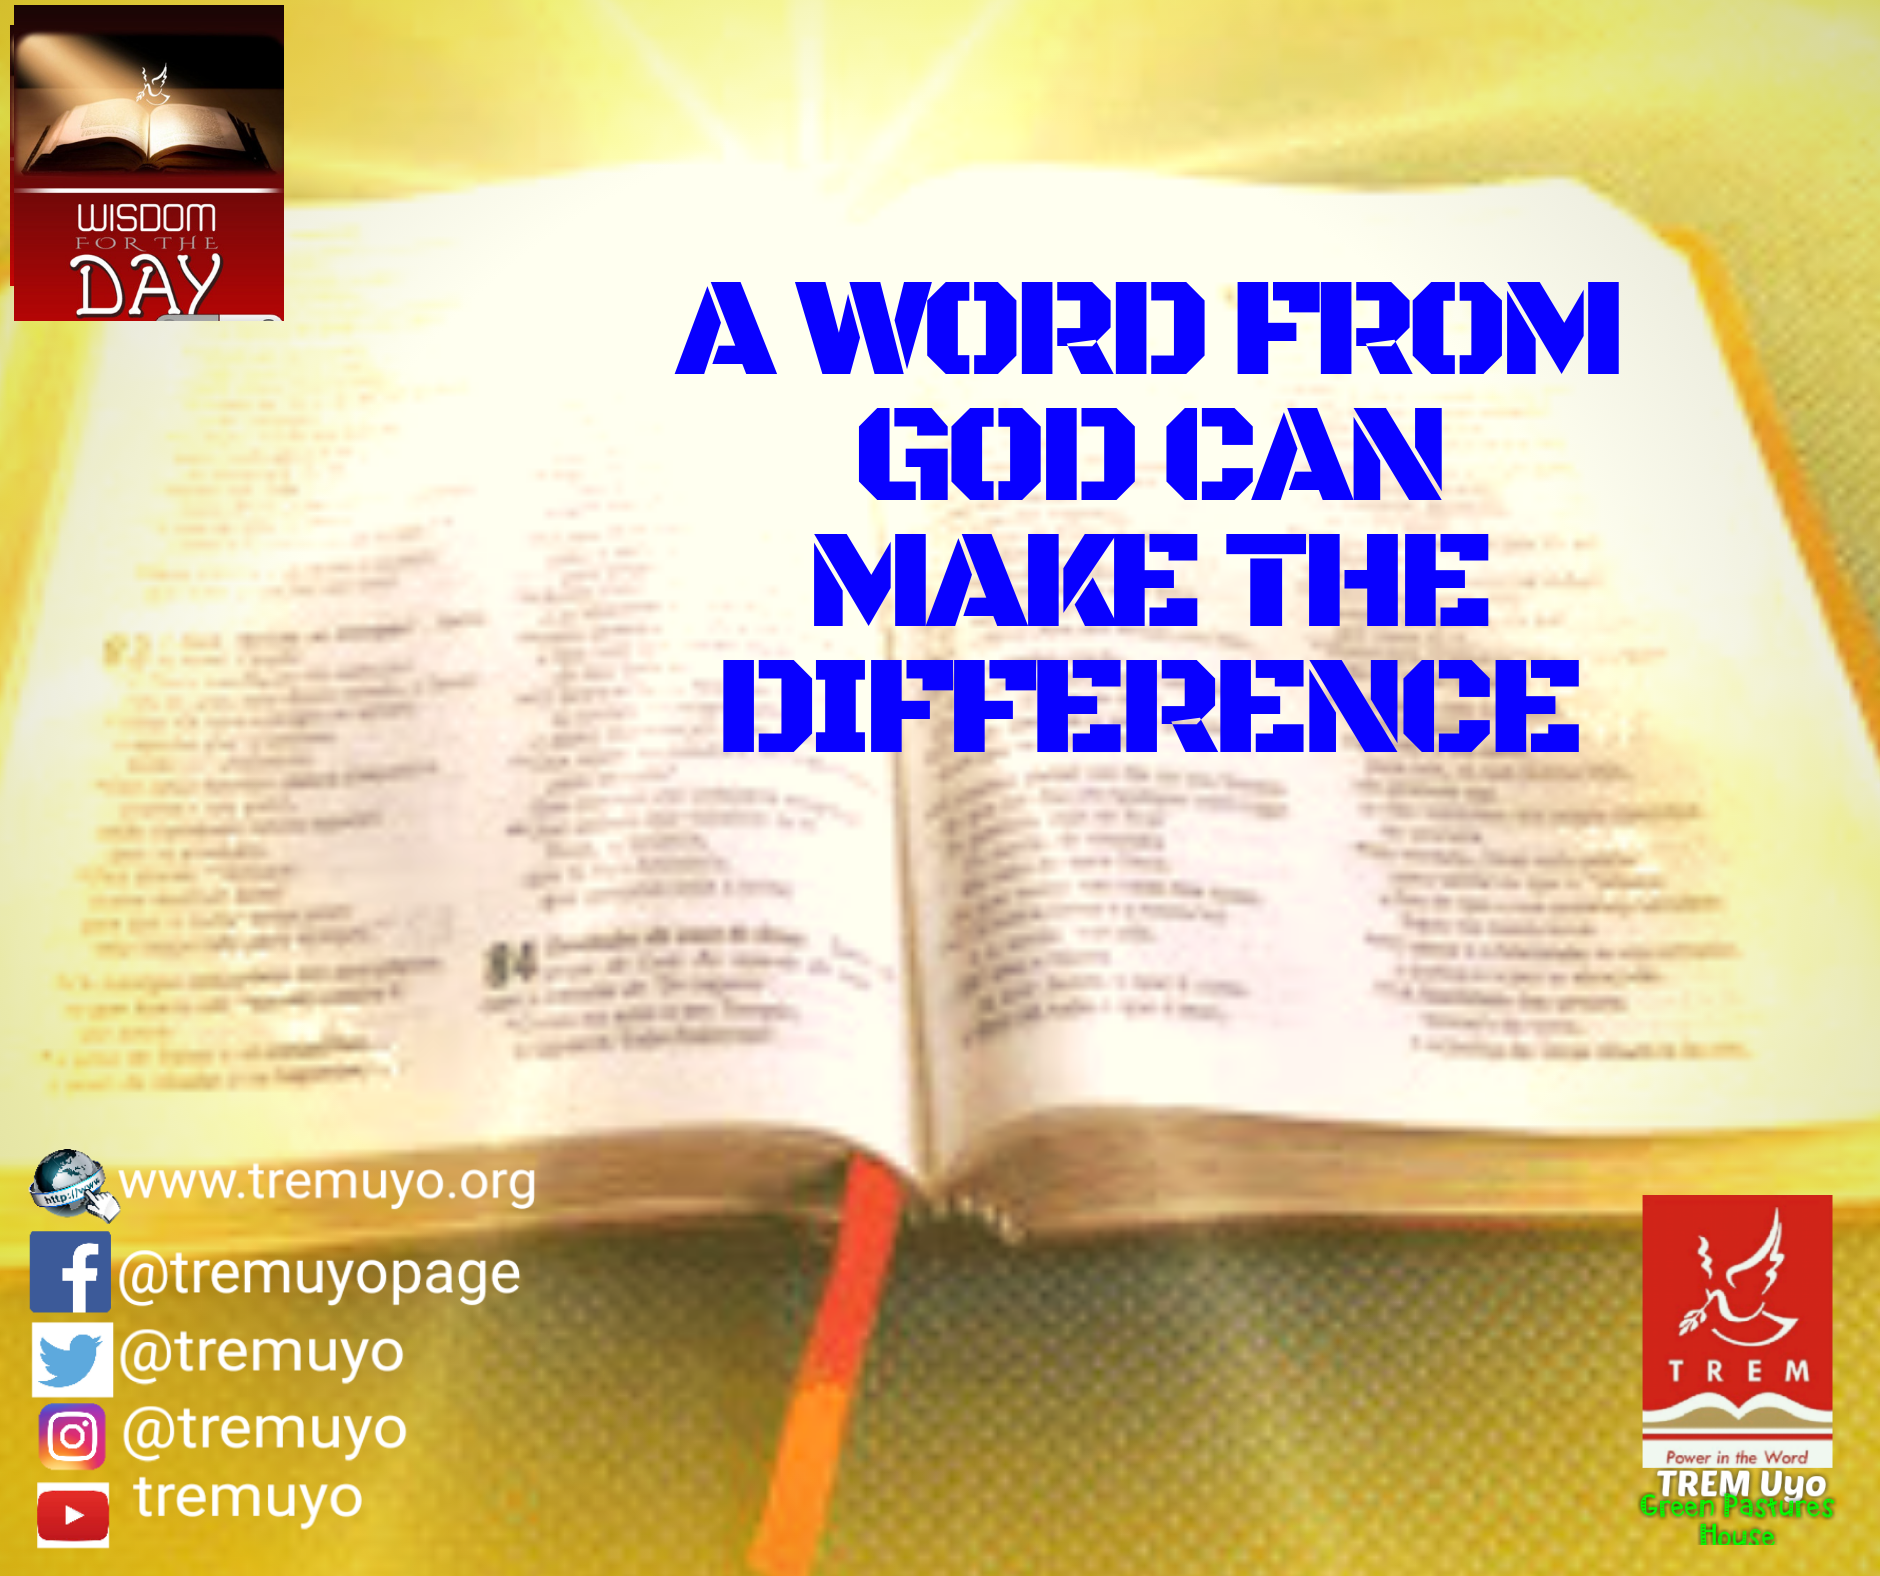 A WORD FROM GOD CAN MAKE THE DIFFERENCE